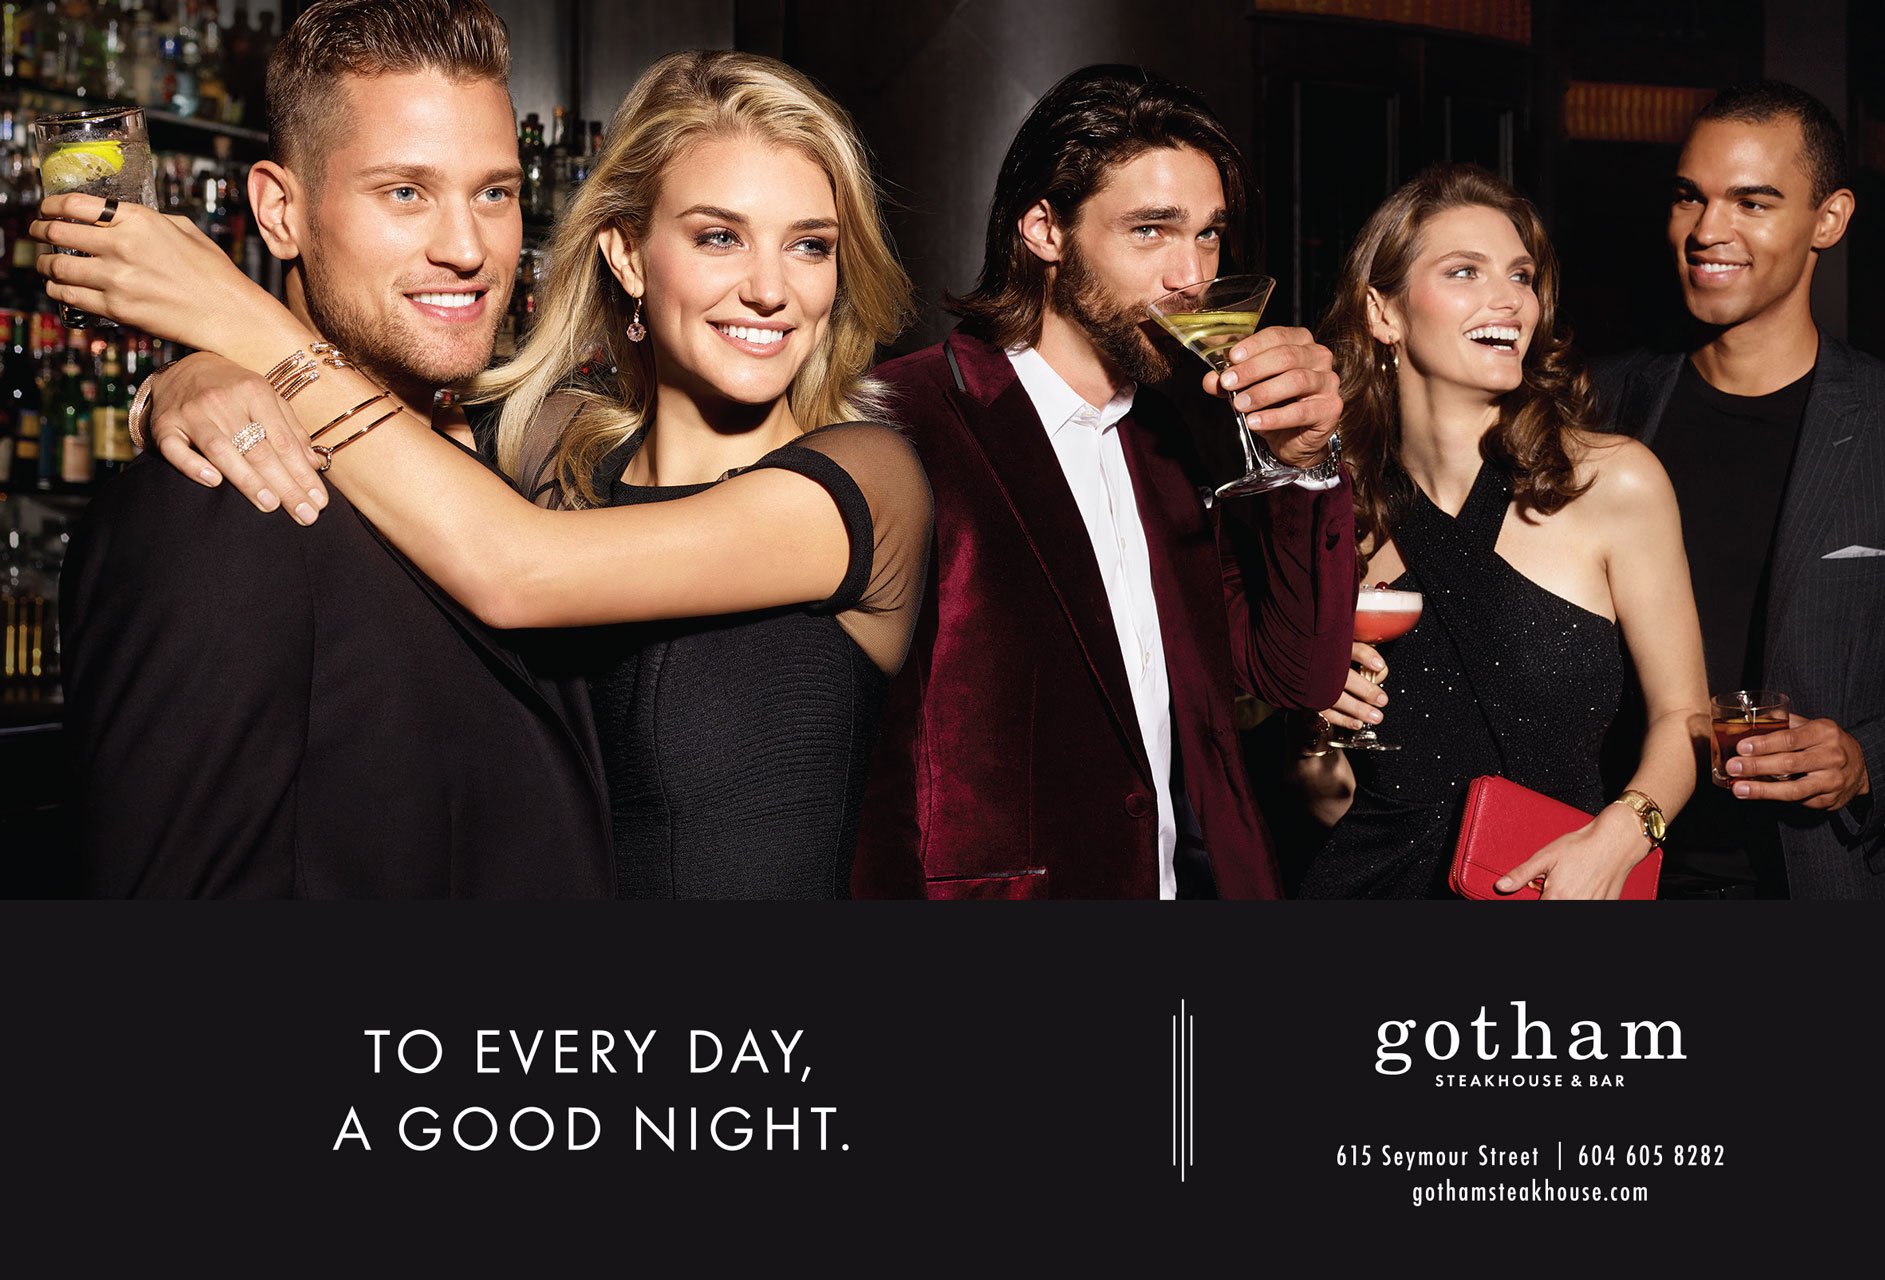 David Fierro's lifestyle image for Gotham Steakhouse & Bar, featuring happy patrons and their drinks